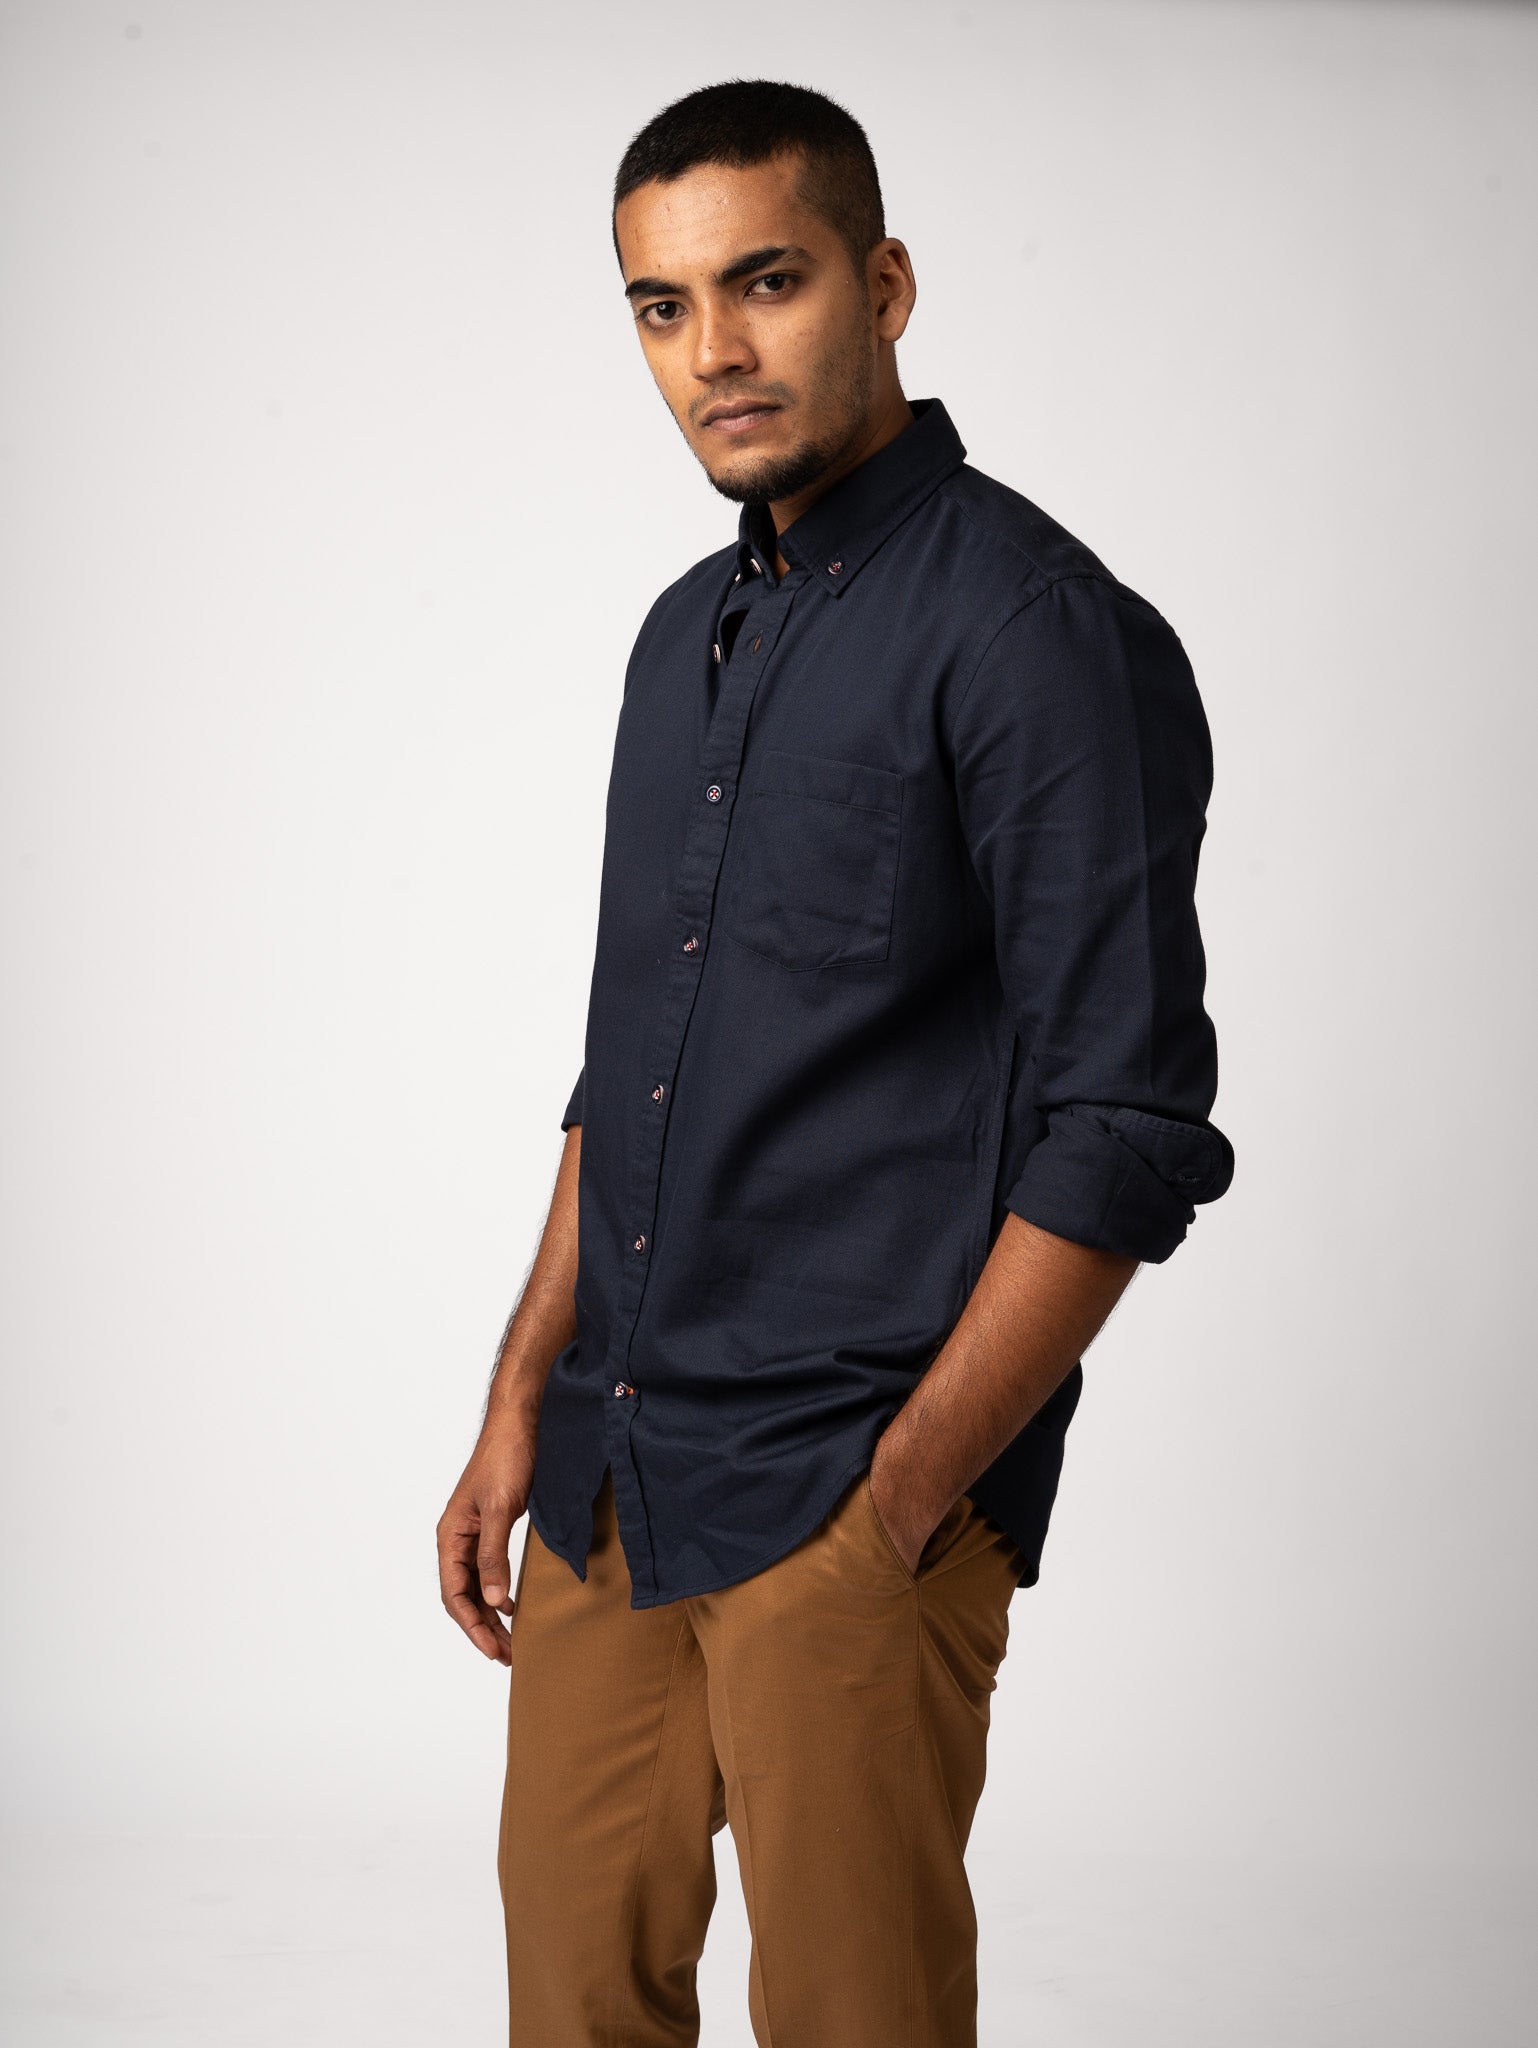 Bare Brown Solid Cotton Oxford Shirt, Slim Fit with Full Sleeves - Navy